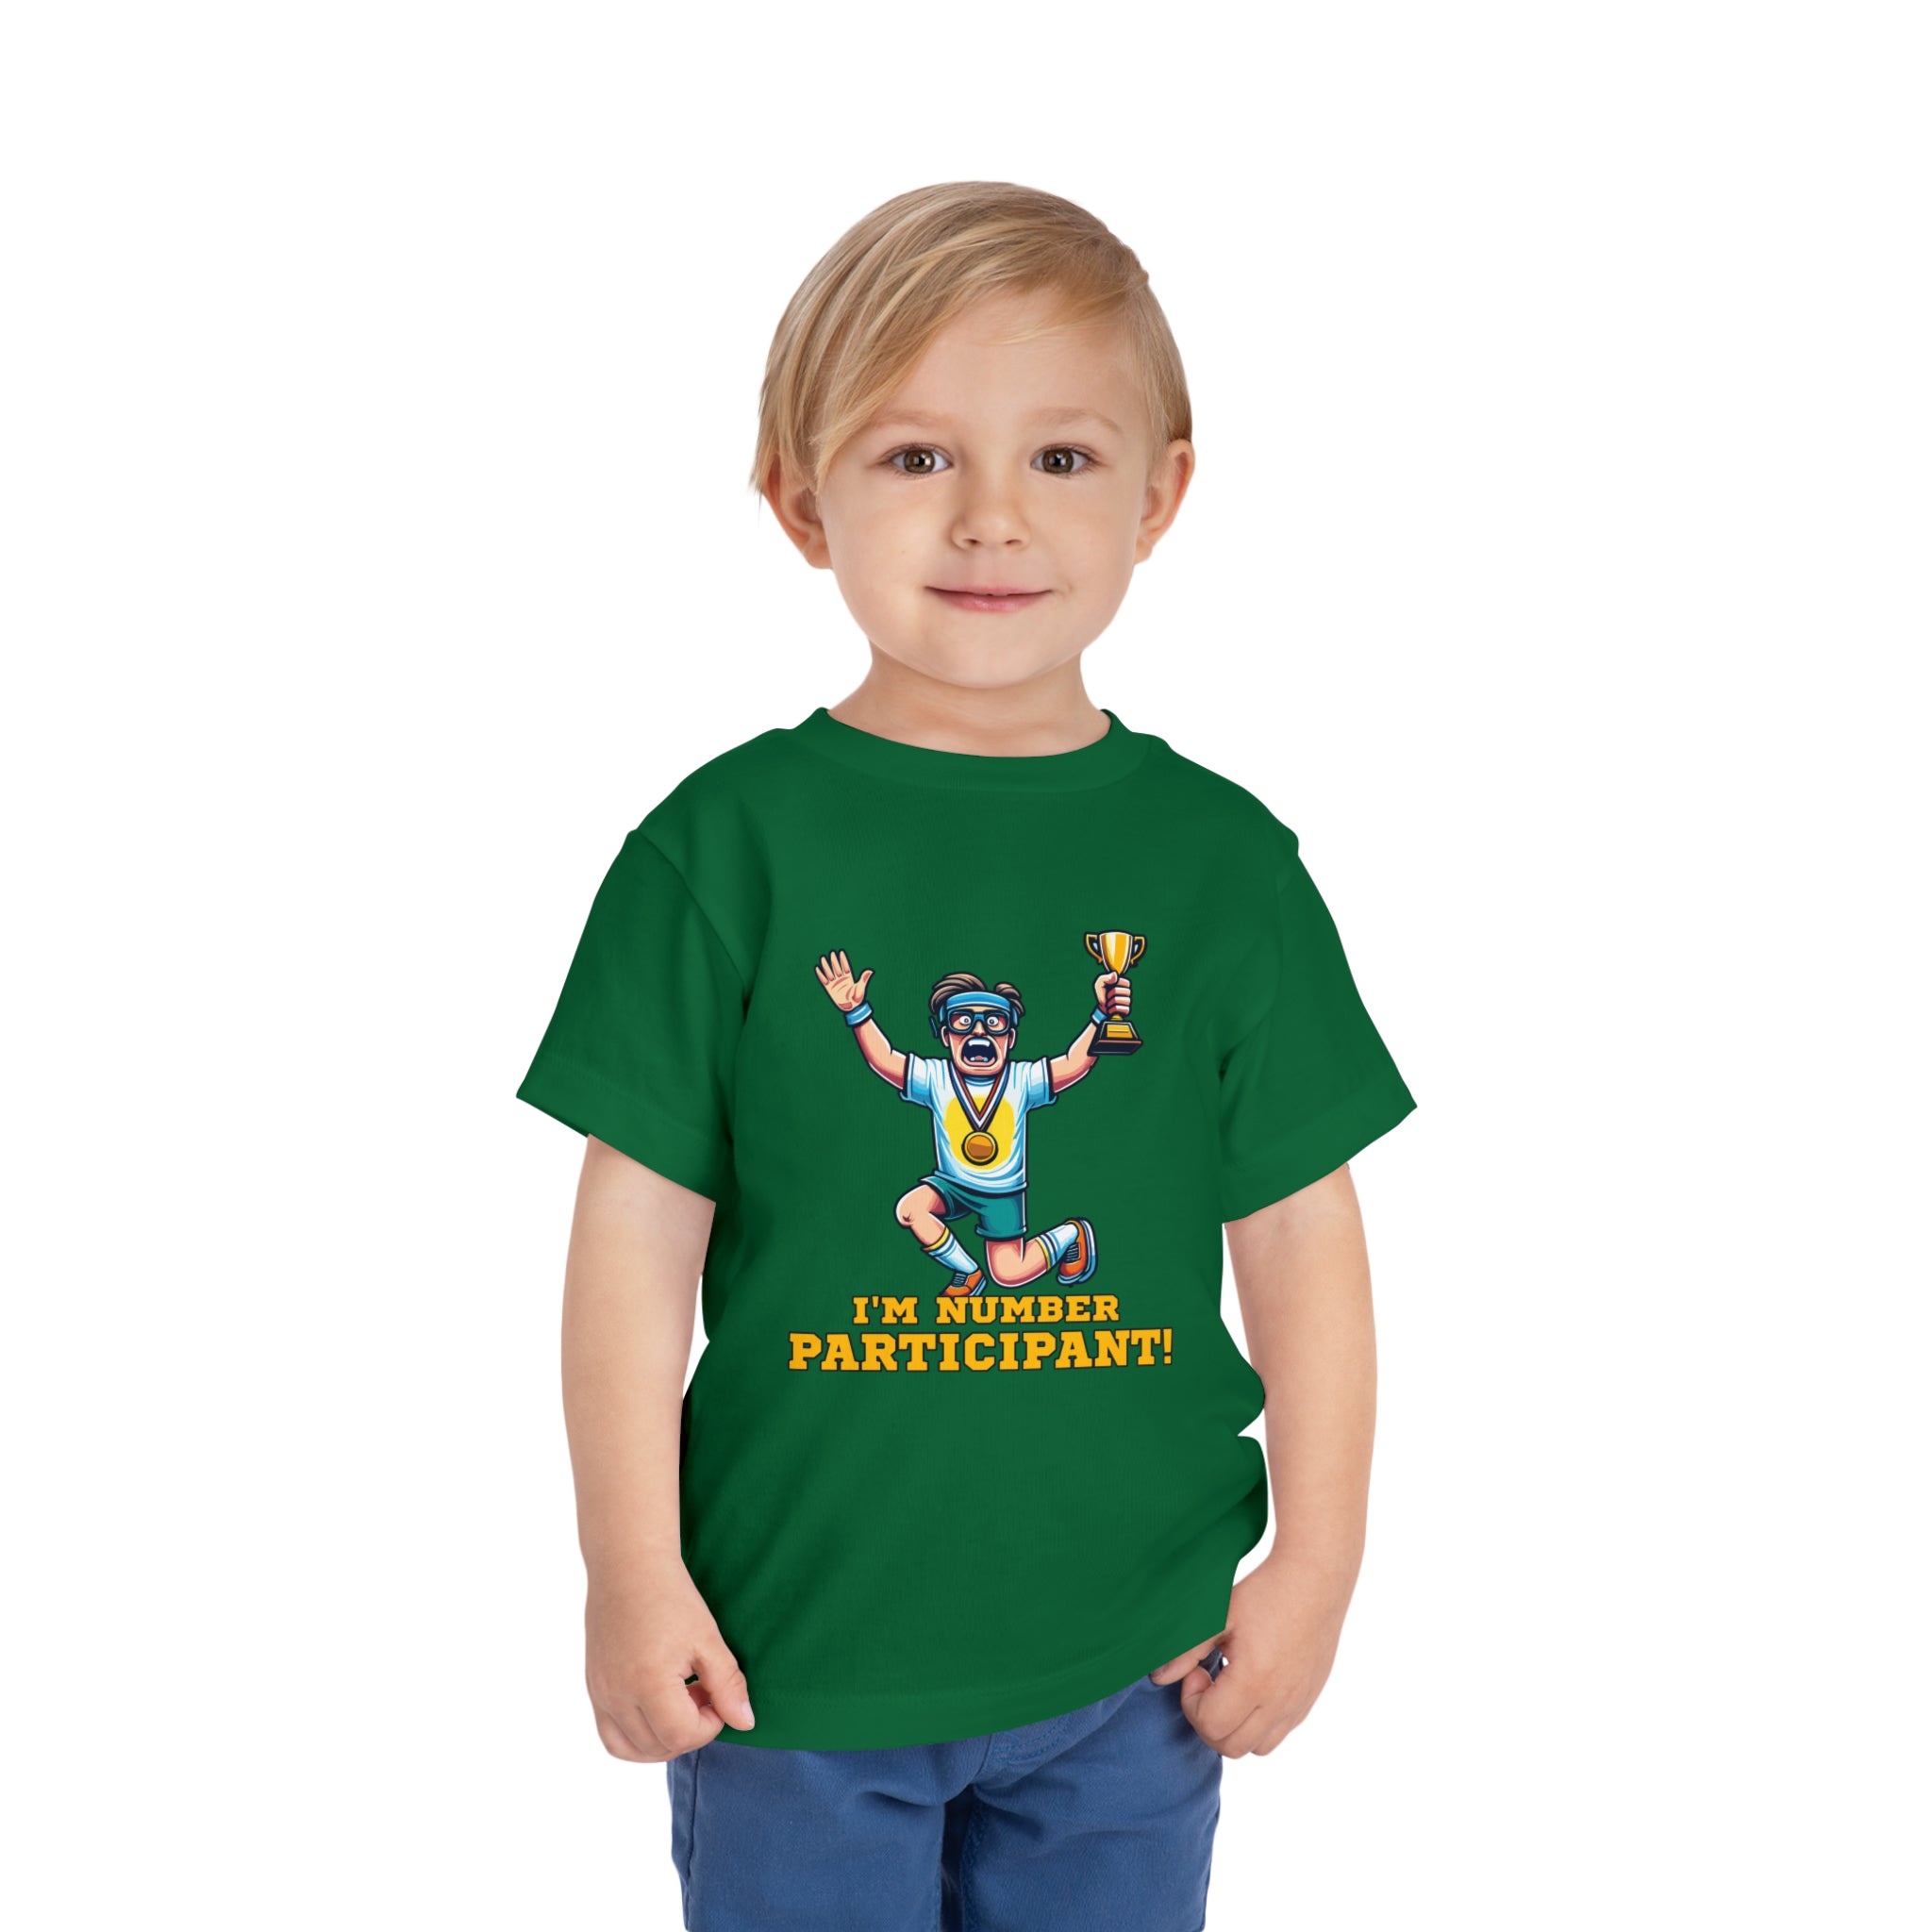 I'm Number Participant [Toddler Tee]